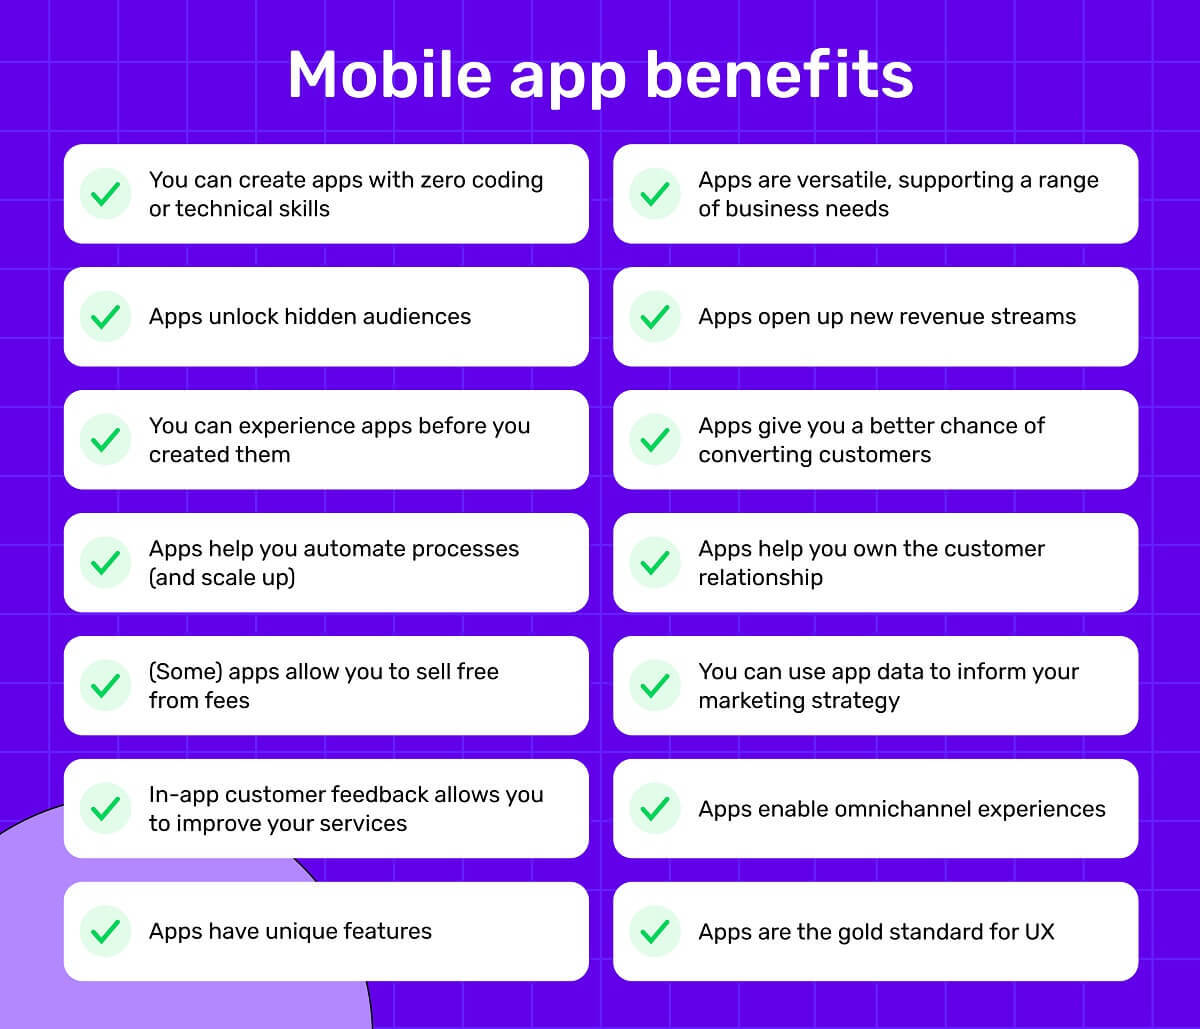 Mobile app benefits to a business organisation